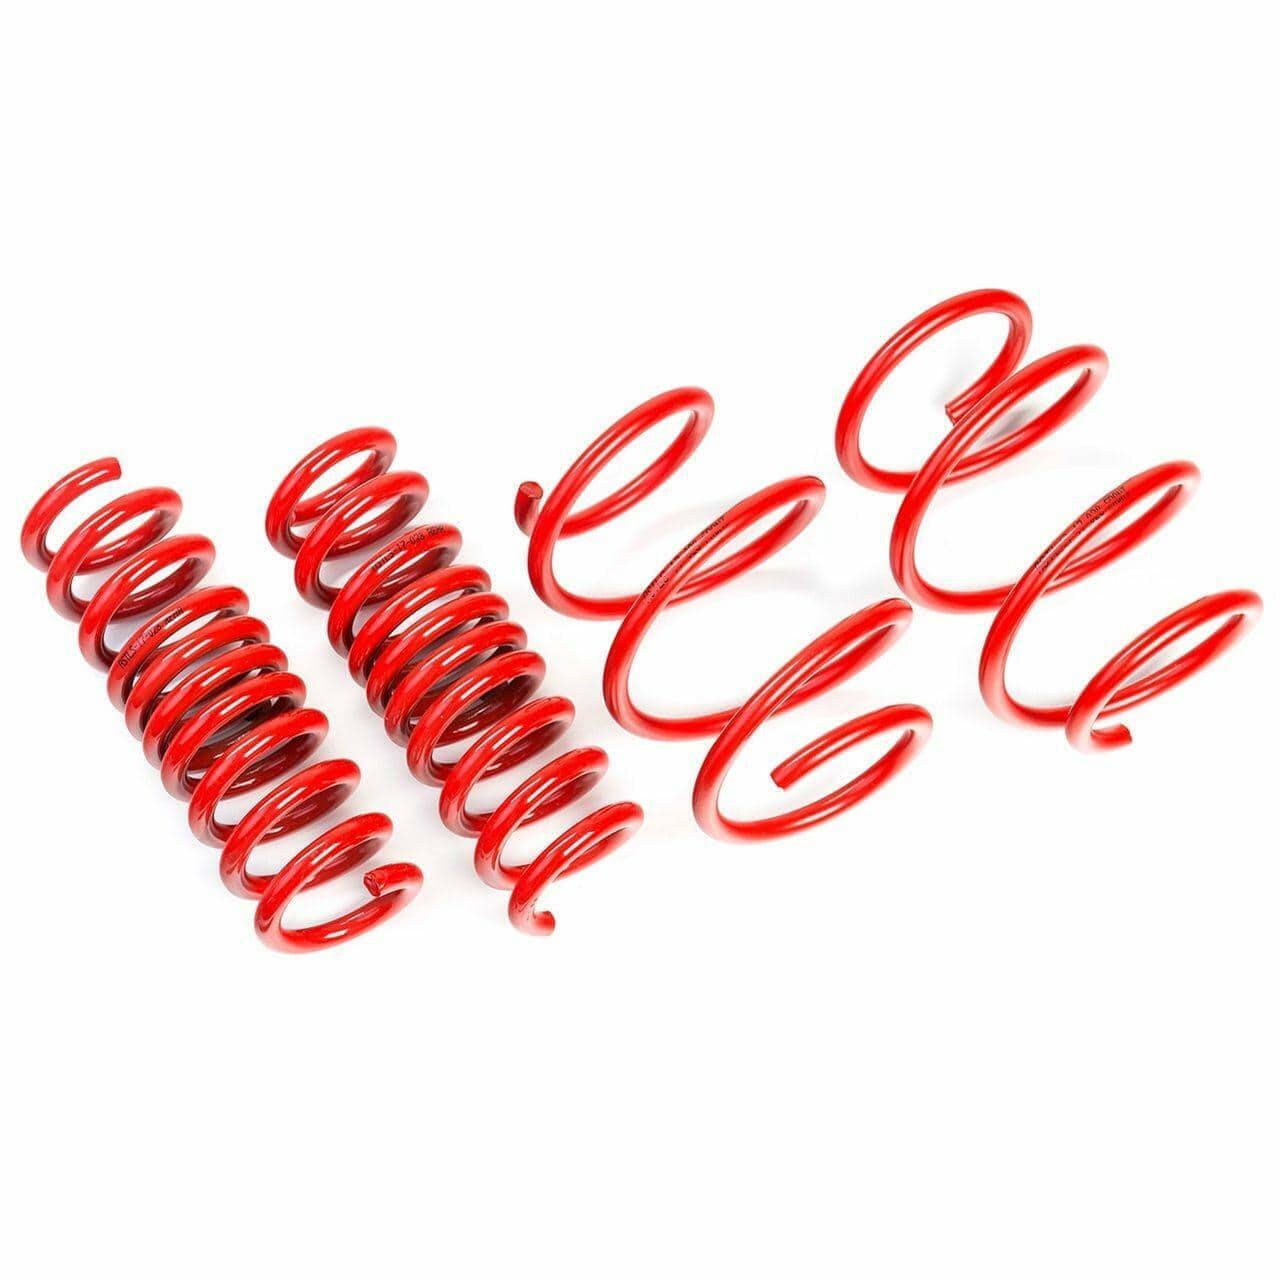 AST Suspension Lowering Springs (30MM/15MM TUV) - 1992-1995 BMW 3 Series 320i/325i/325TD/325TDS/328i Compact/Coupe (E36) ASTLS-14-355